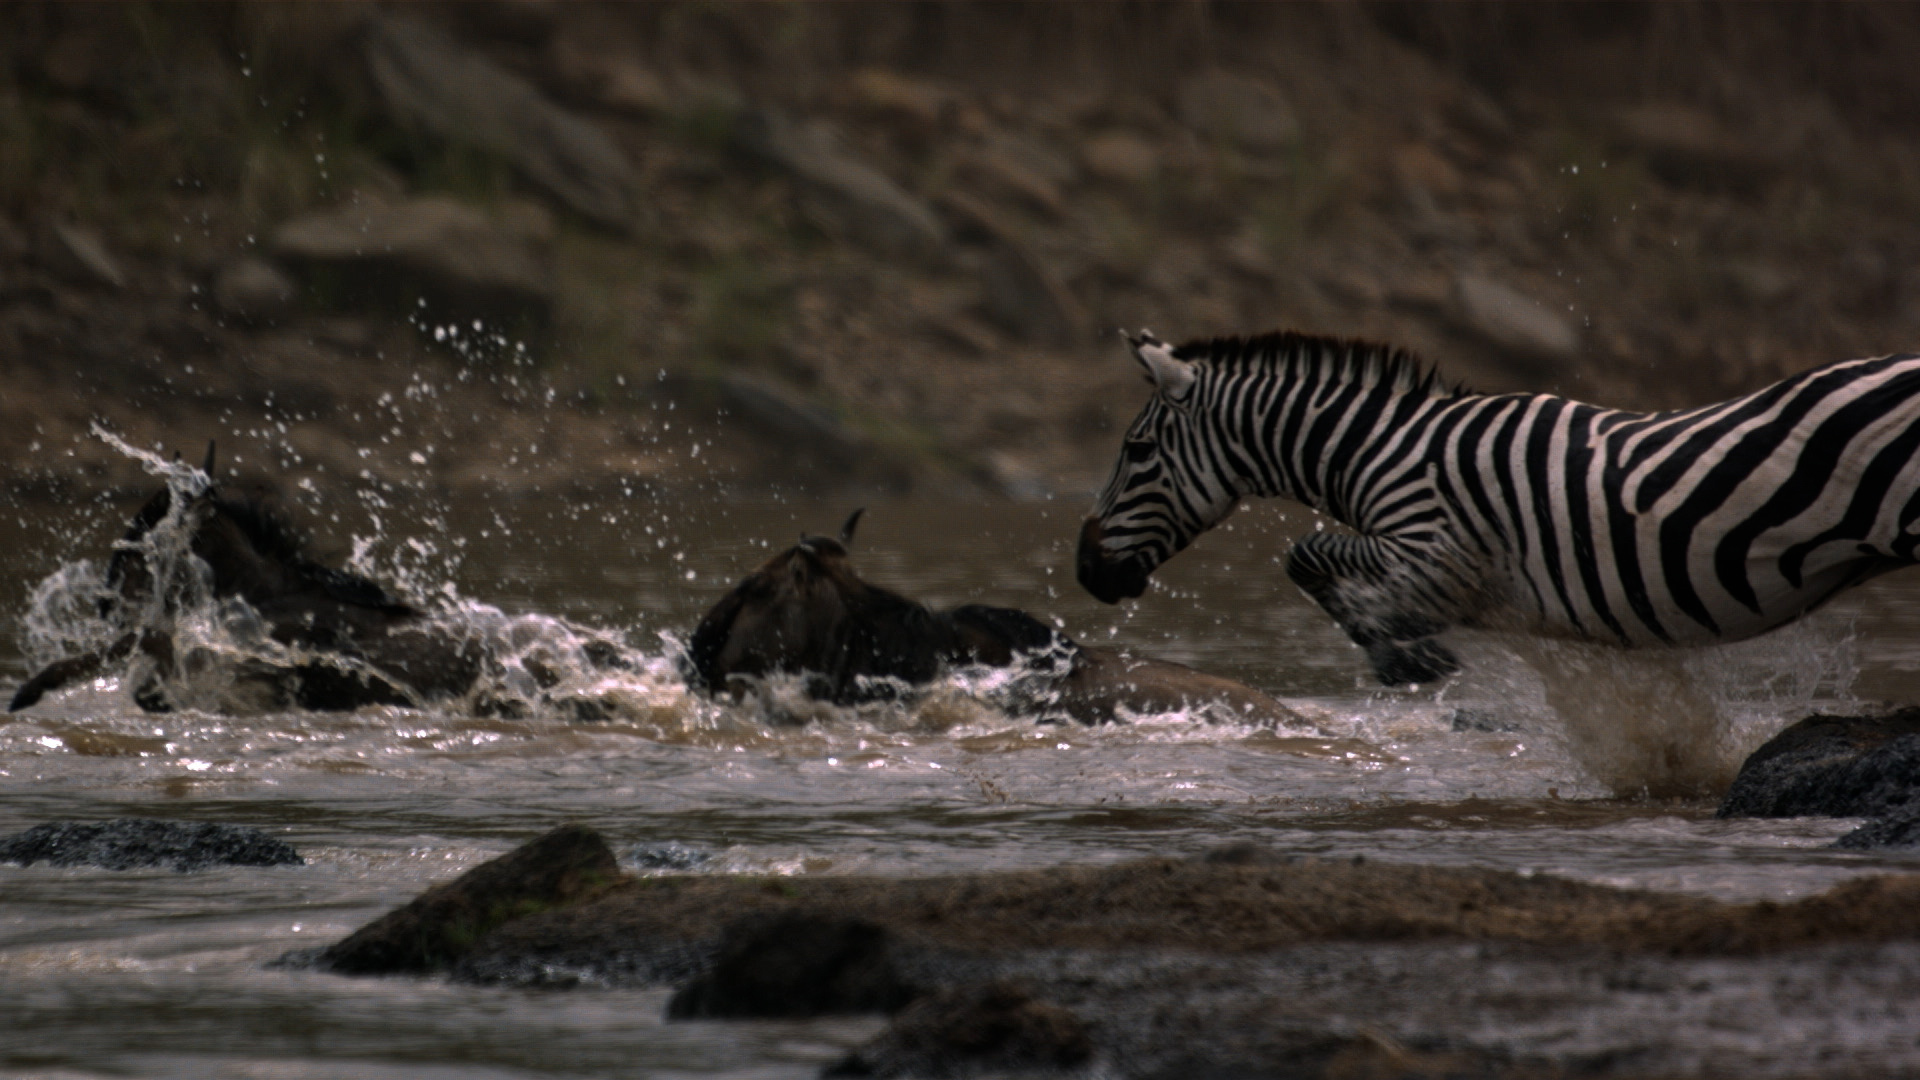 Zebra leaps into raging river current with wildebeest. This is from Zebras of the Serengeti. [Photo of the day - May 2022]